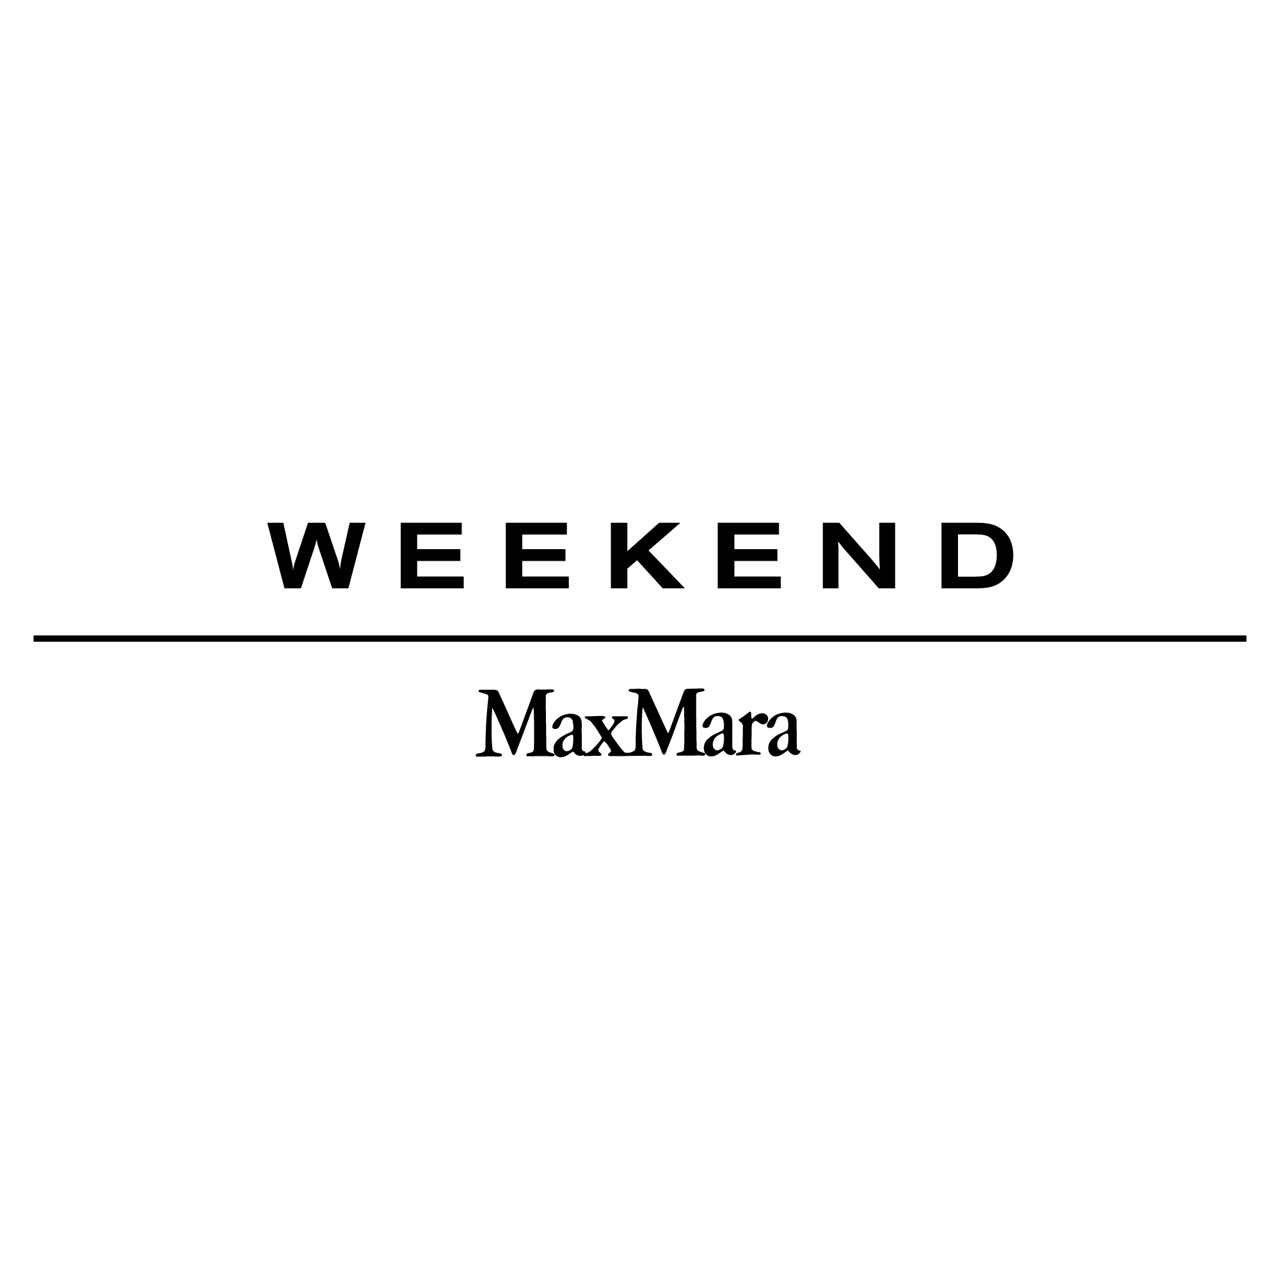 Weekend Max Mara - Women's Clothing Stores